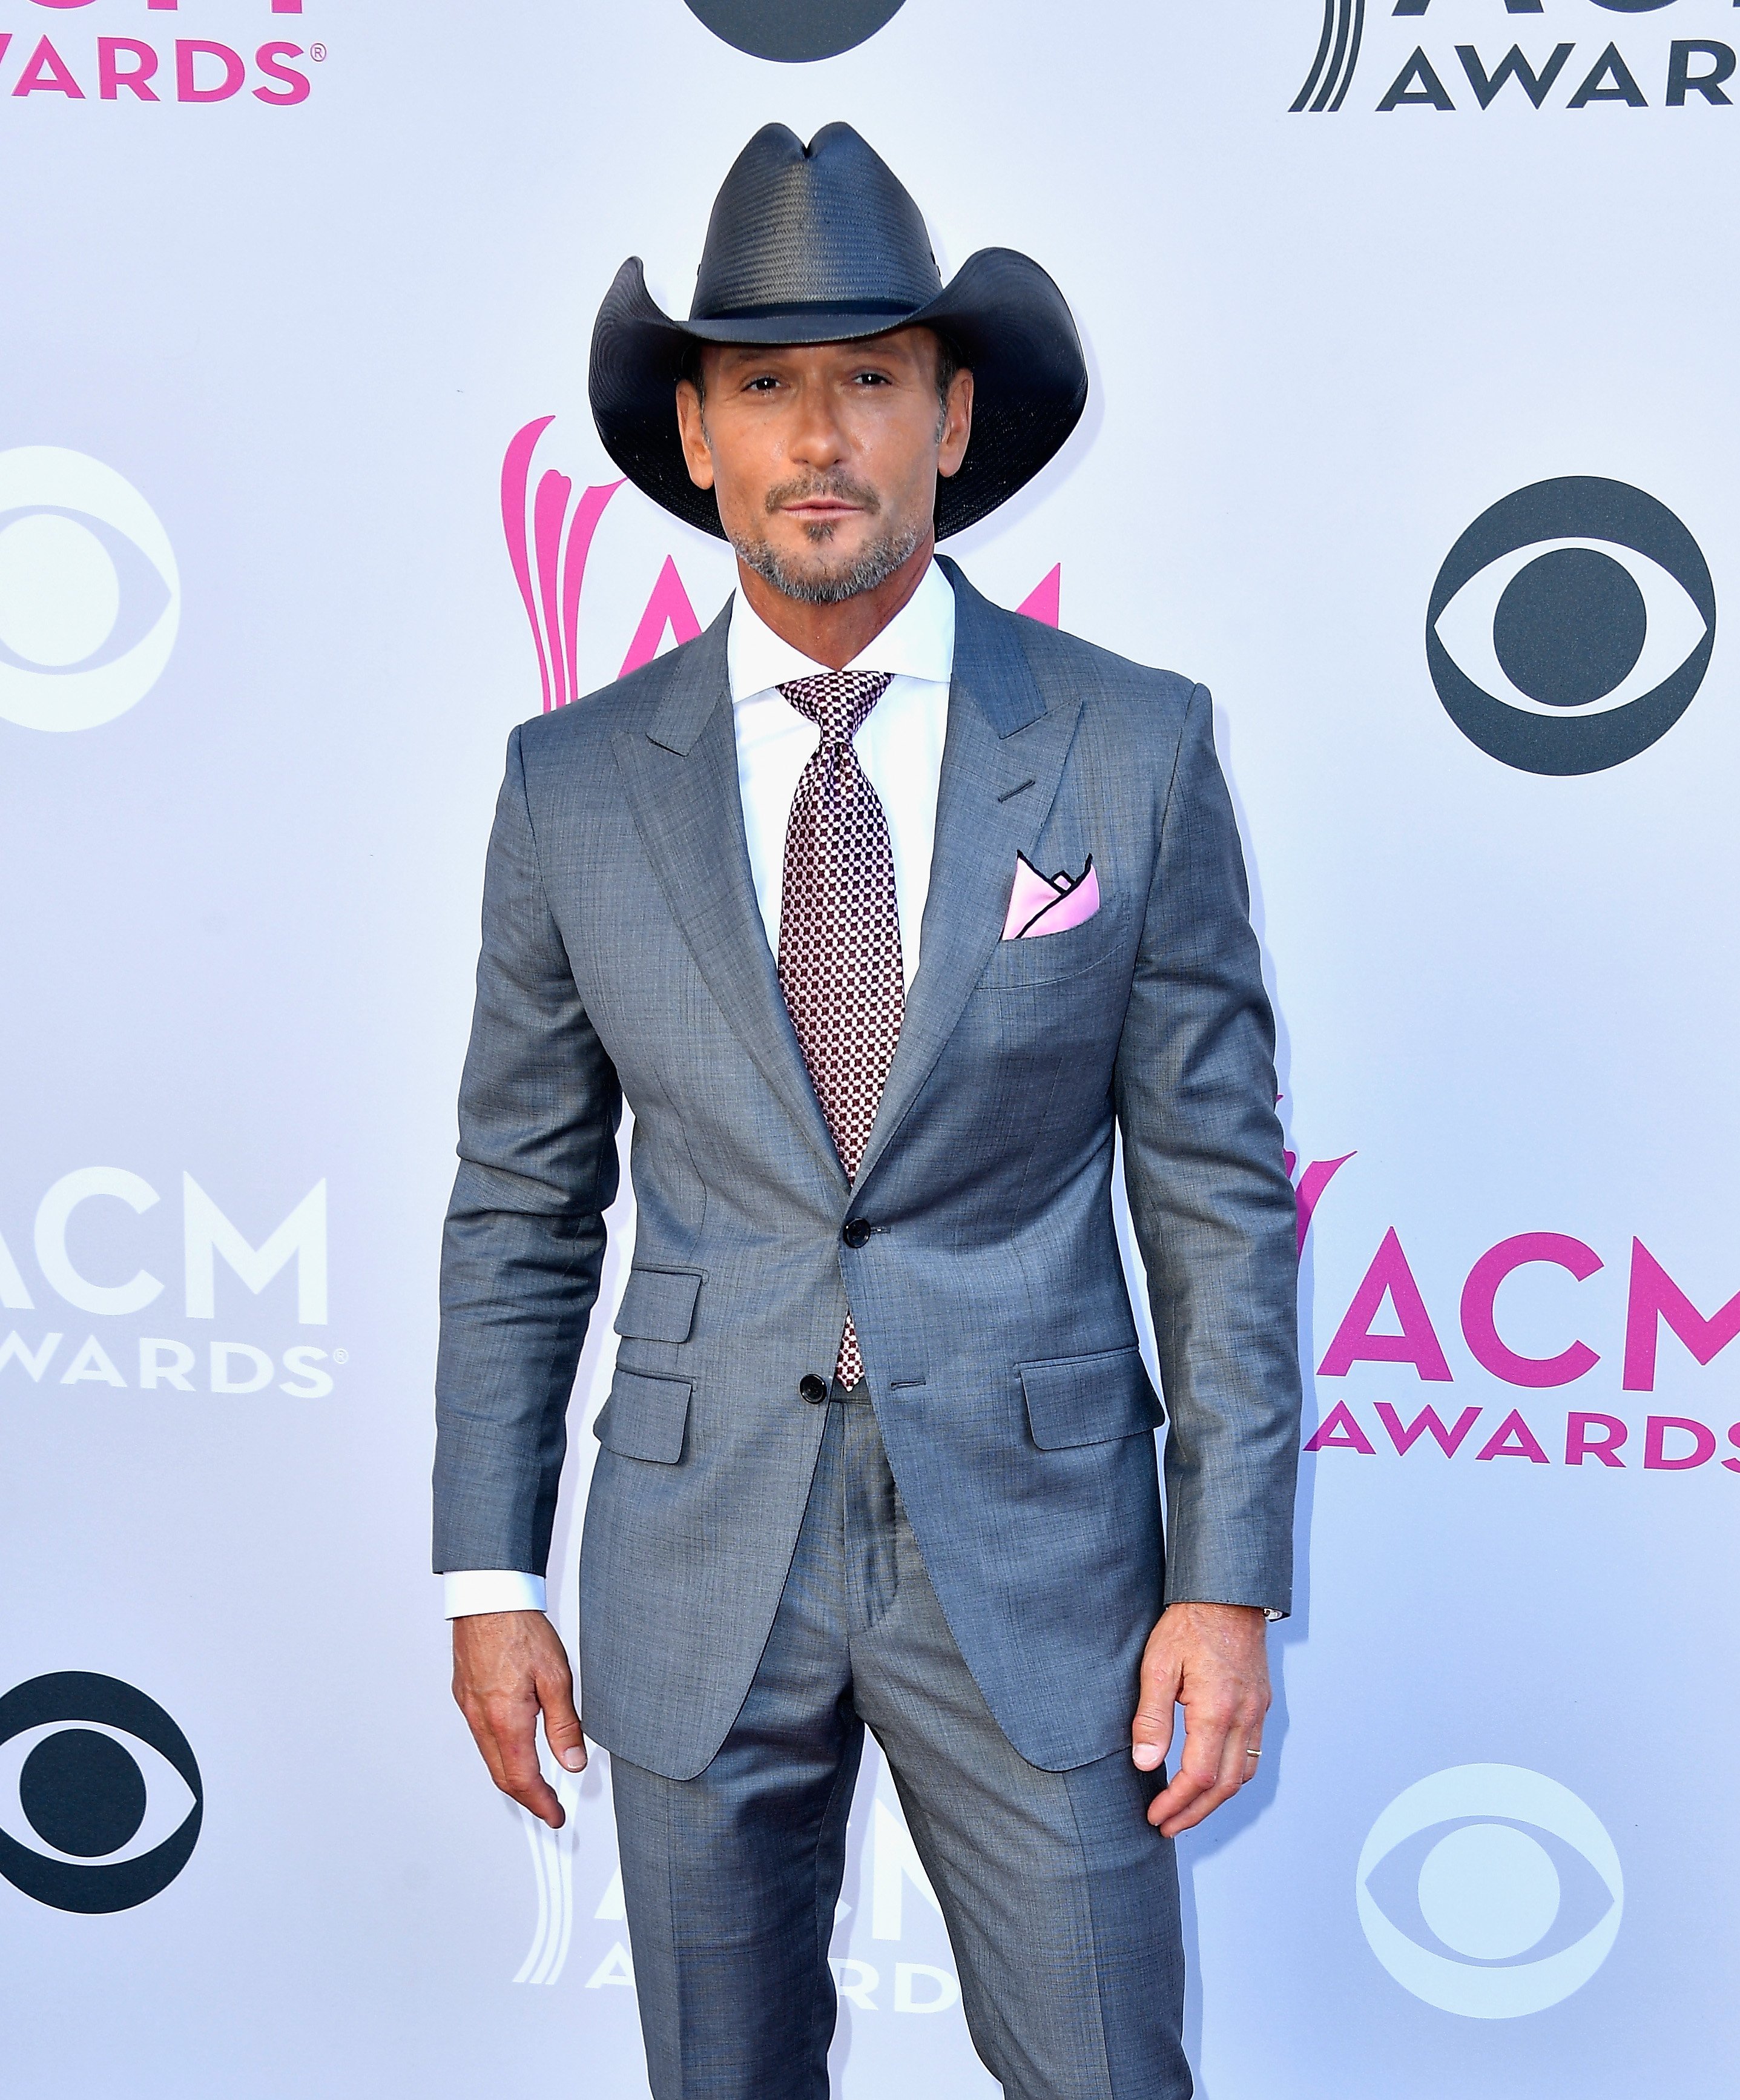 Tim McGraw at the 52nd Academy of Country Music Awards in 2017. | Source: Getty Images